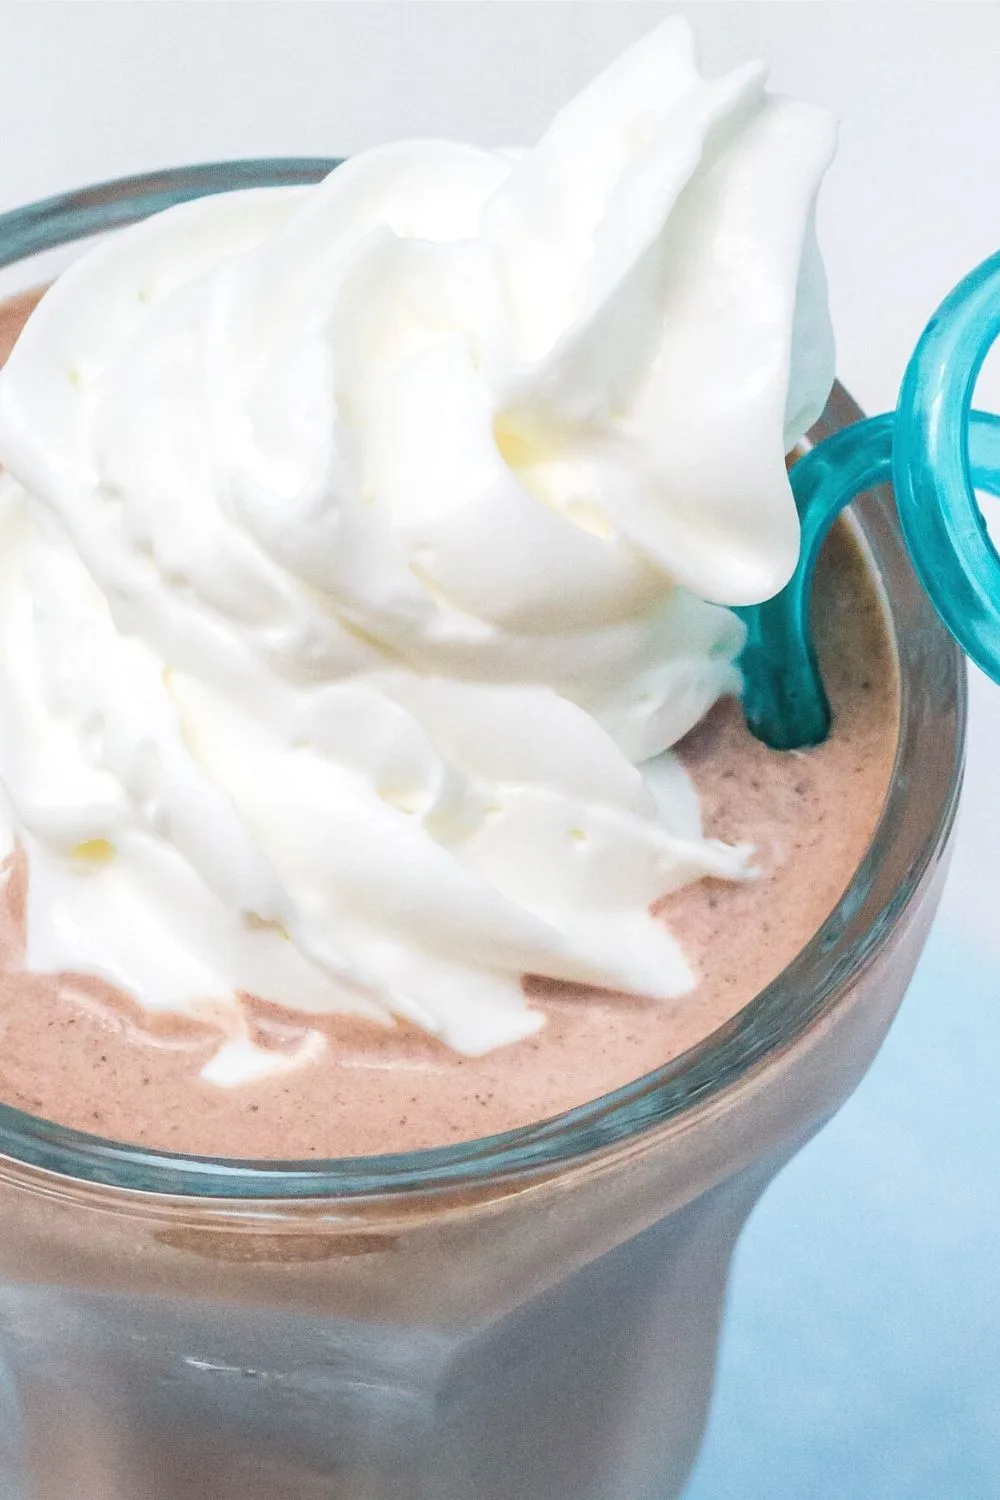 close-up detail view of a Ninja Creami milkshake in chocolate flavor, topped with whipped cream.